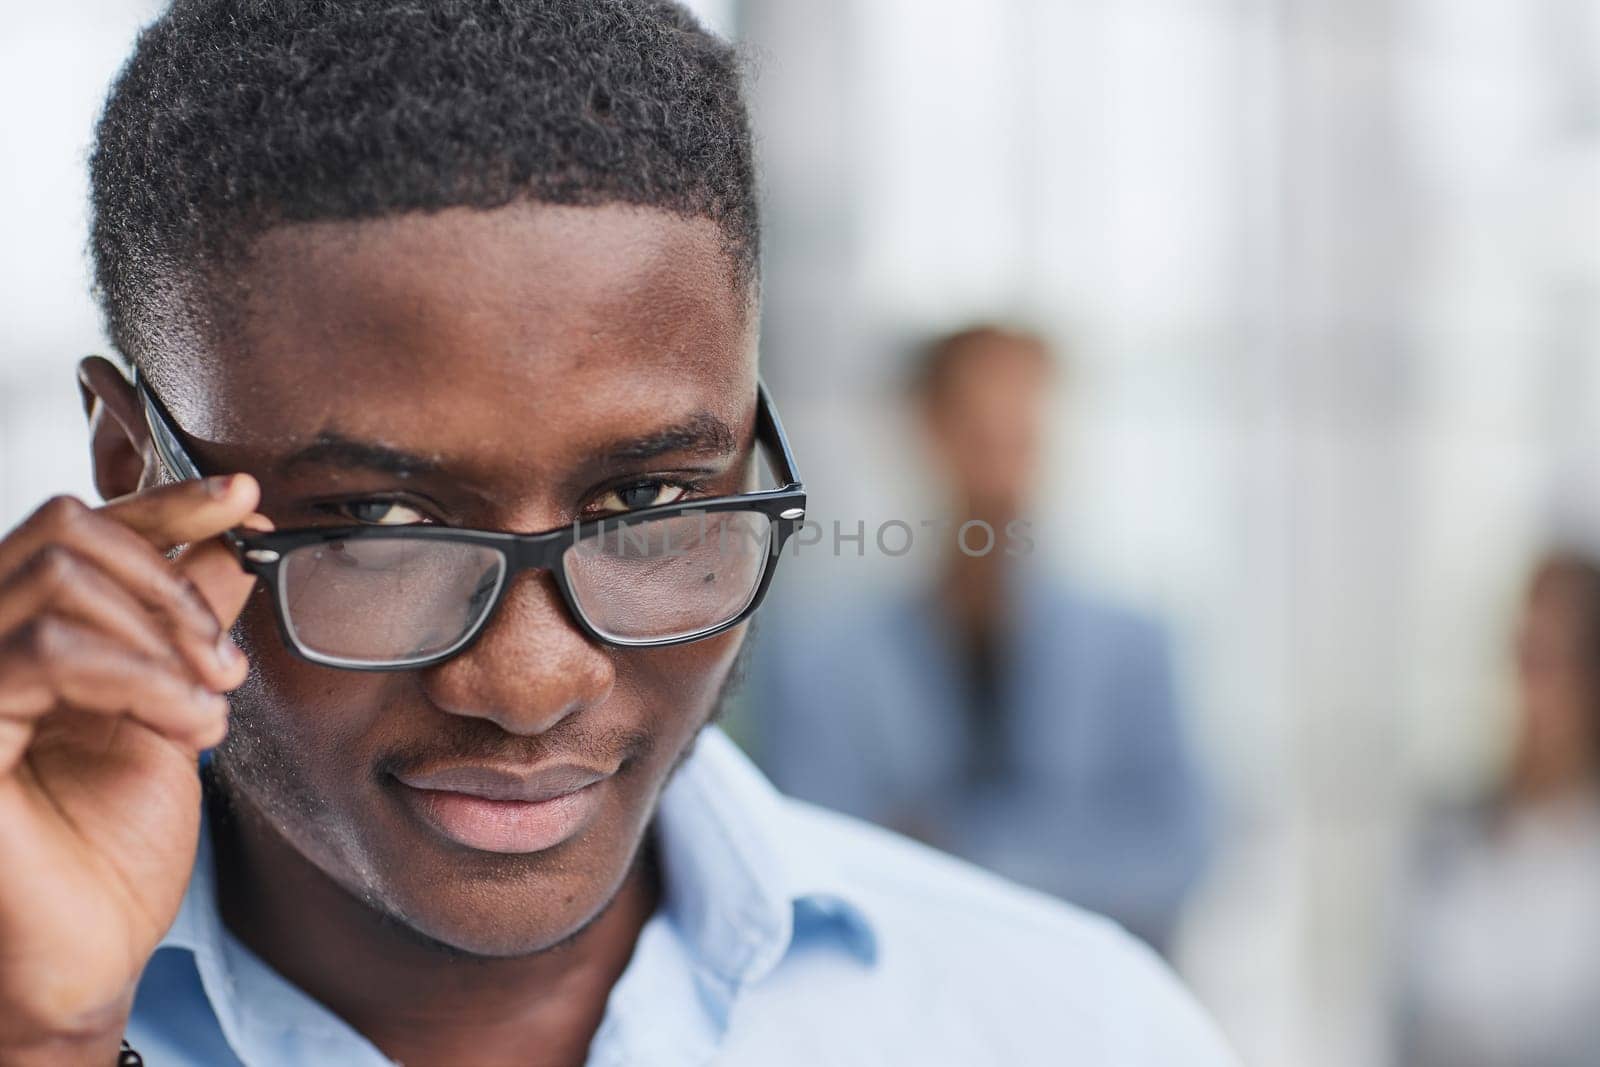 a black man in a blue shirt adjusts his glasses. Against the backdrop of the office